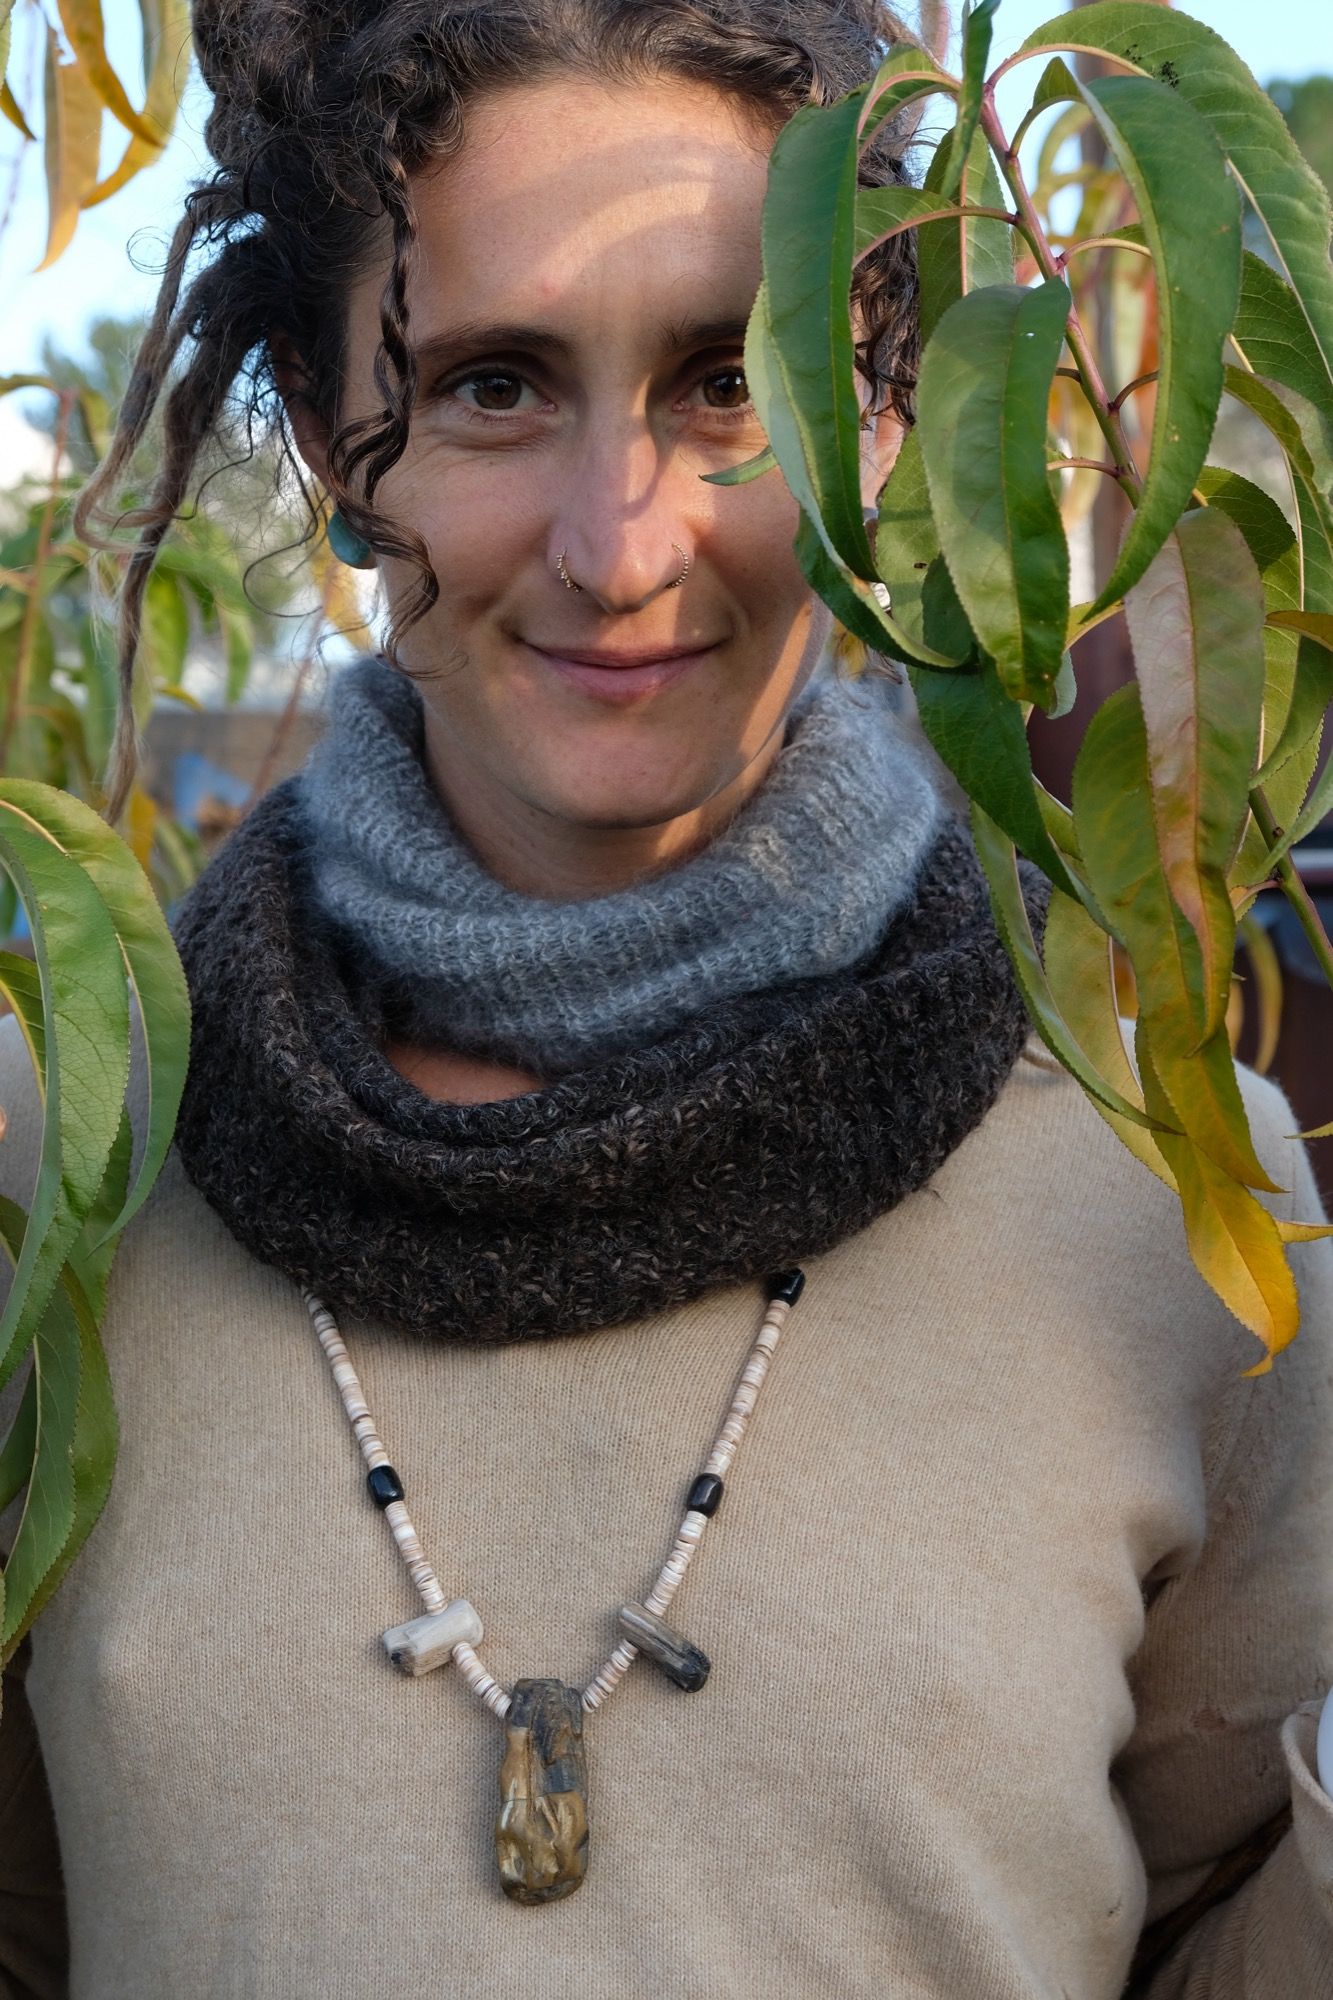 woman wearing tan sweater with a brown and grey fuzzy cowls and stone and shell necklace stands among the green and yellow leaves of a peach tree